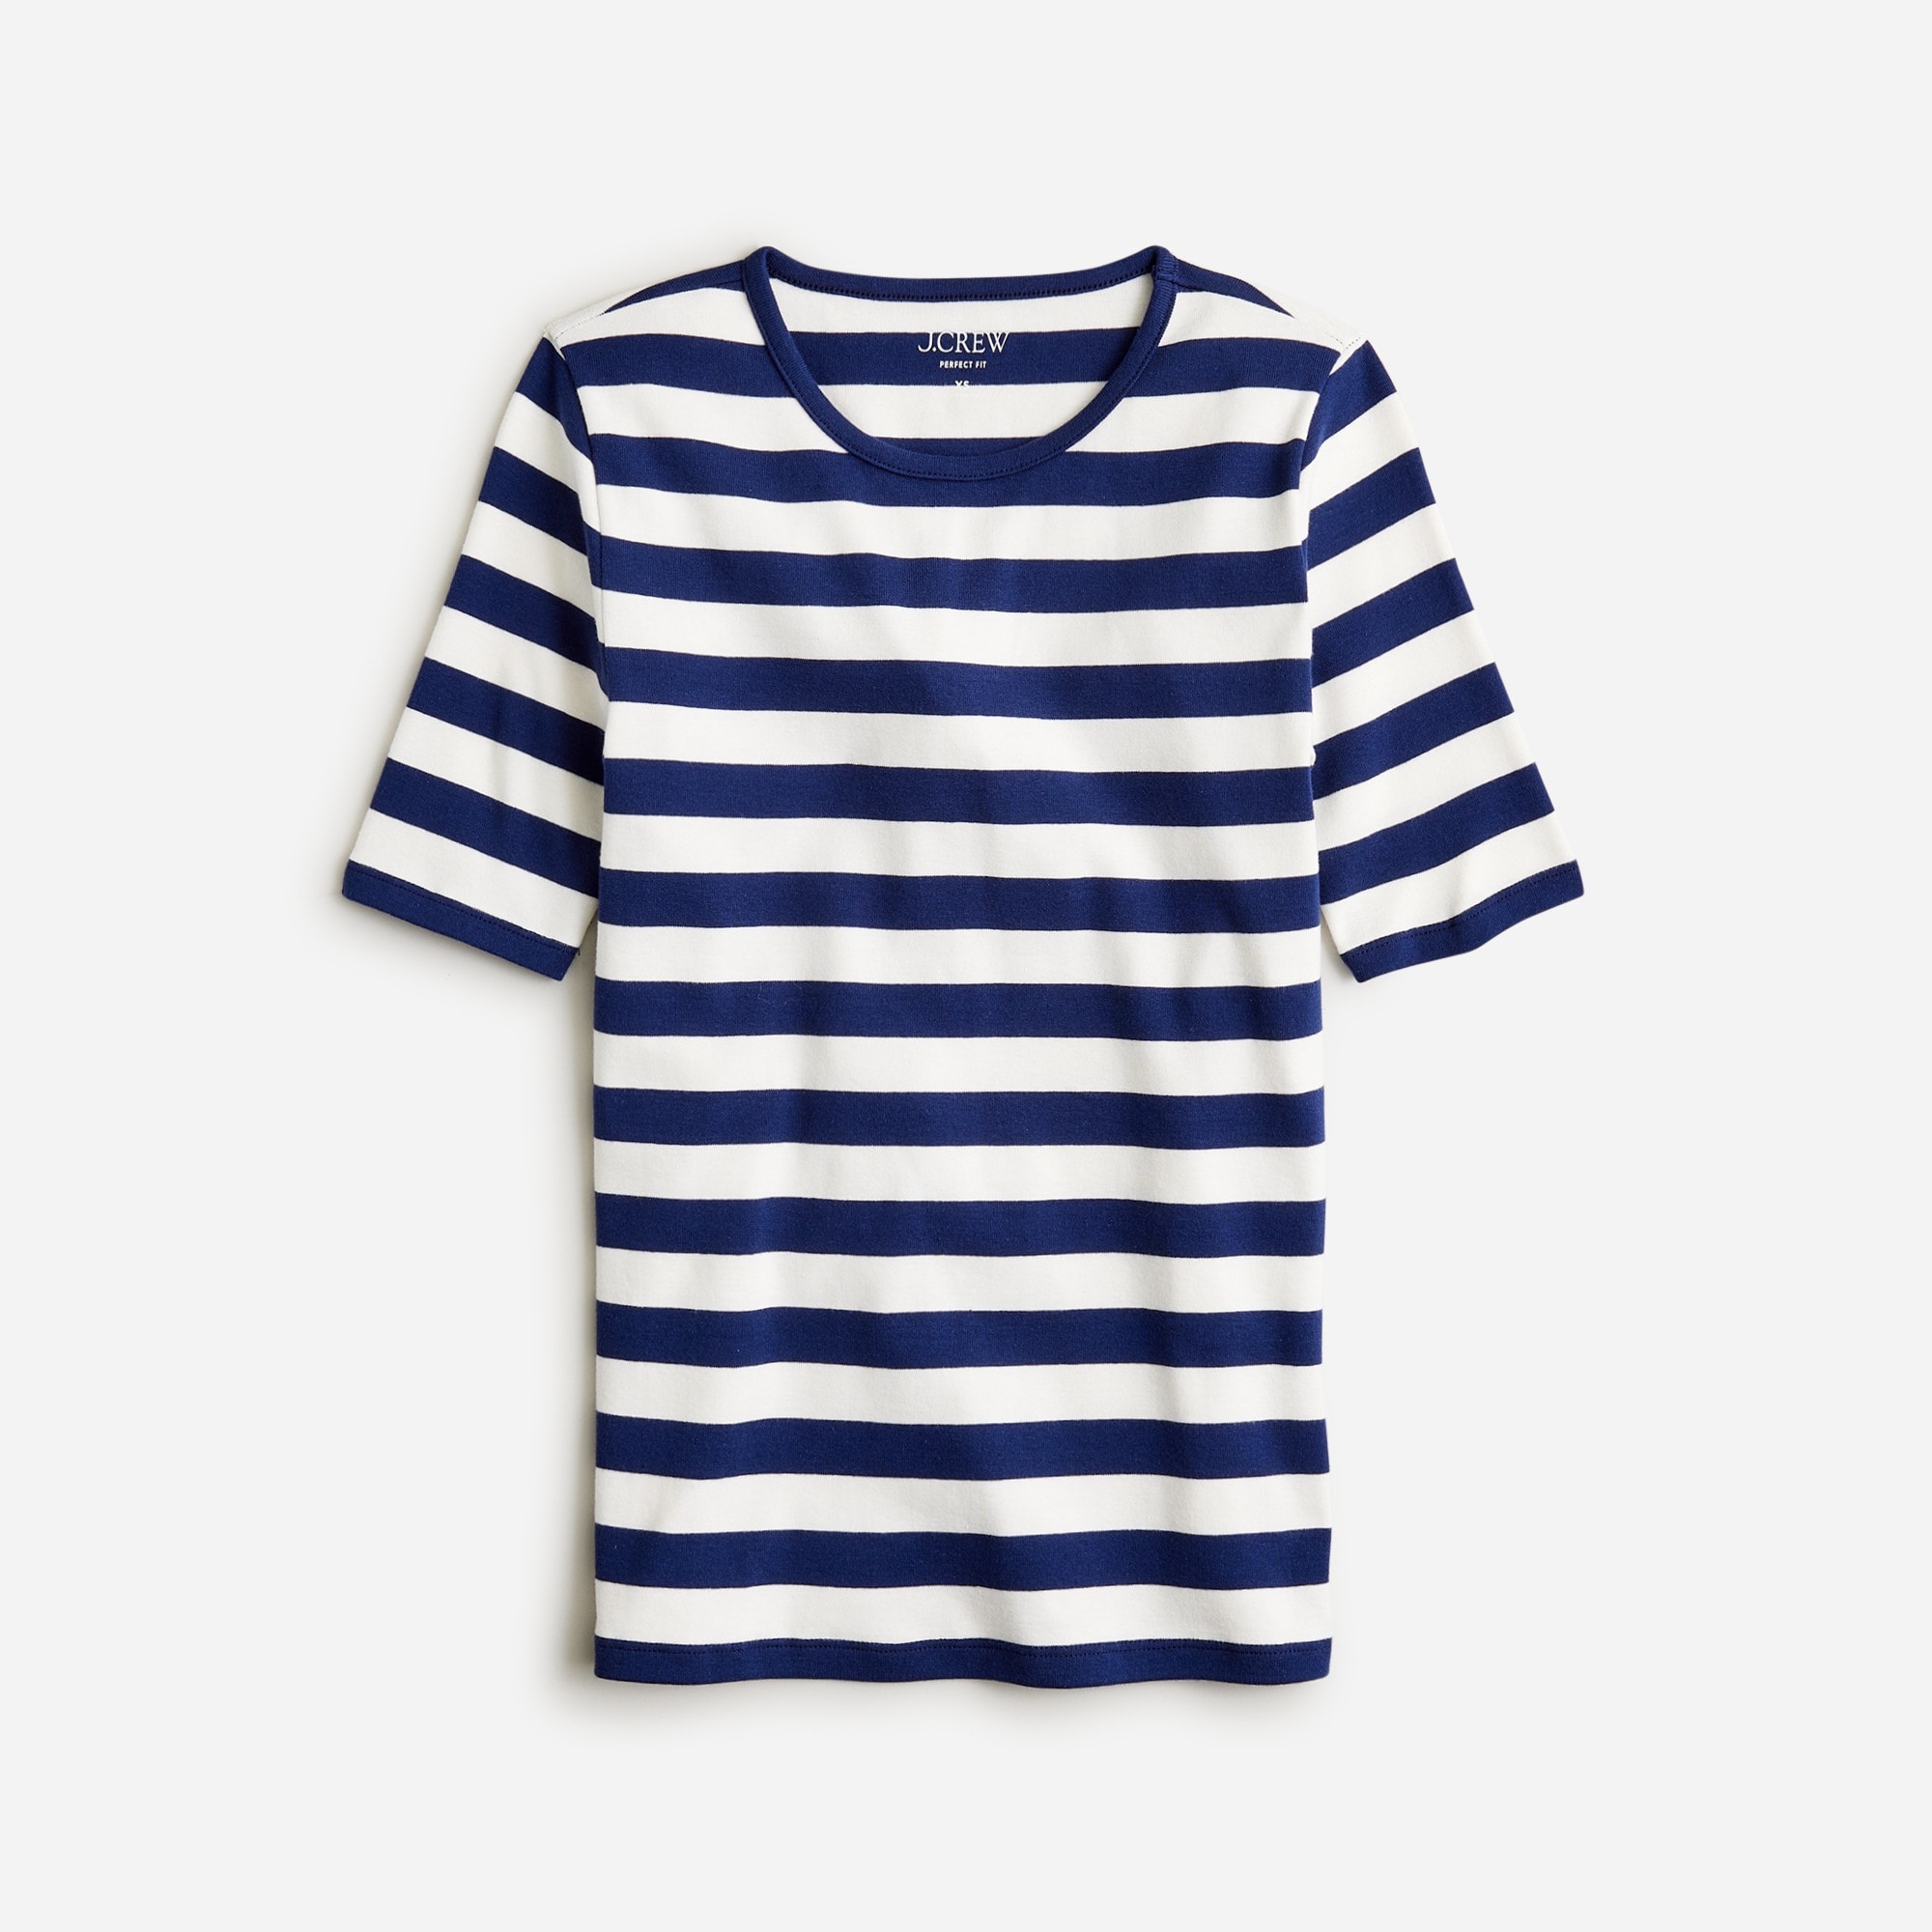  Perfect-fit elbow-sleeve T-shirt in stripe